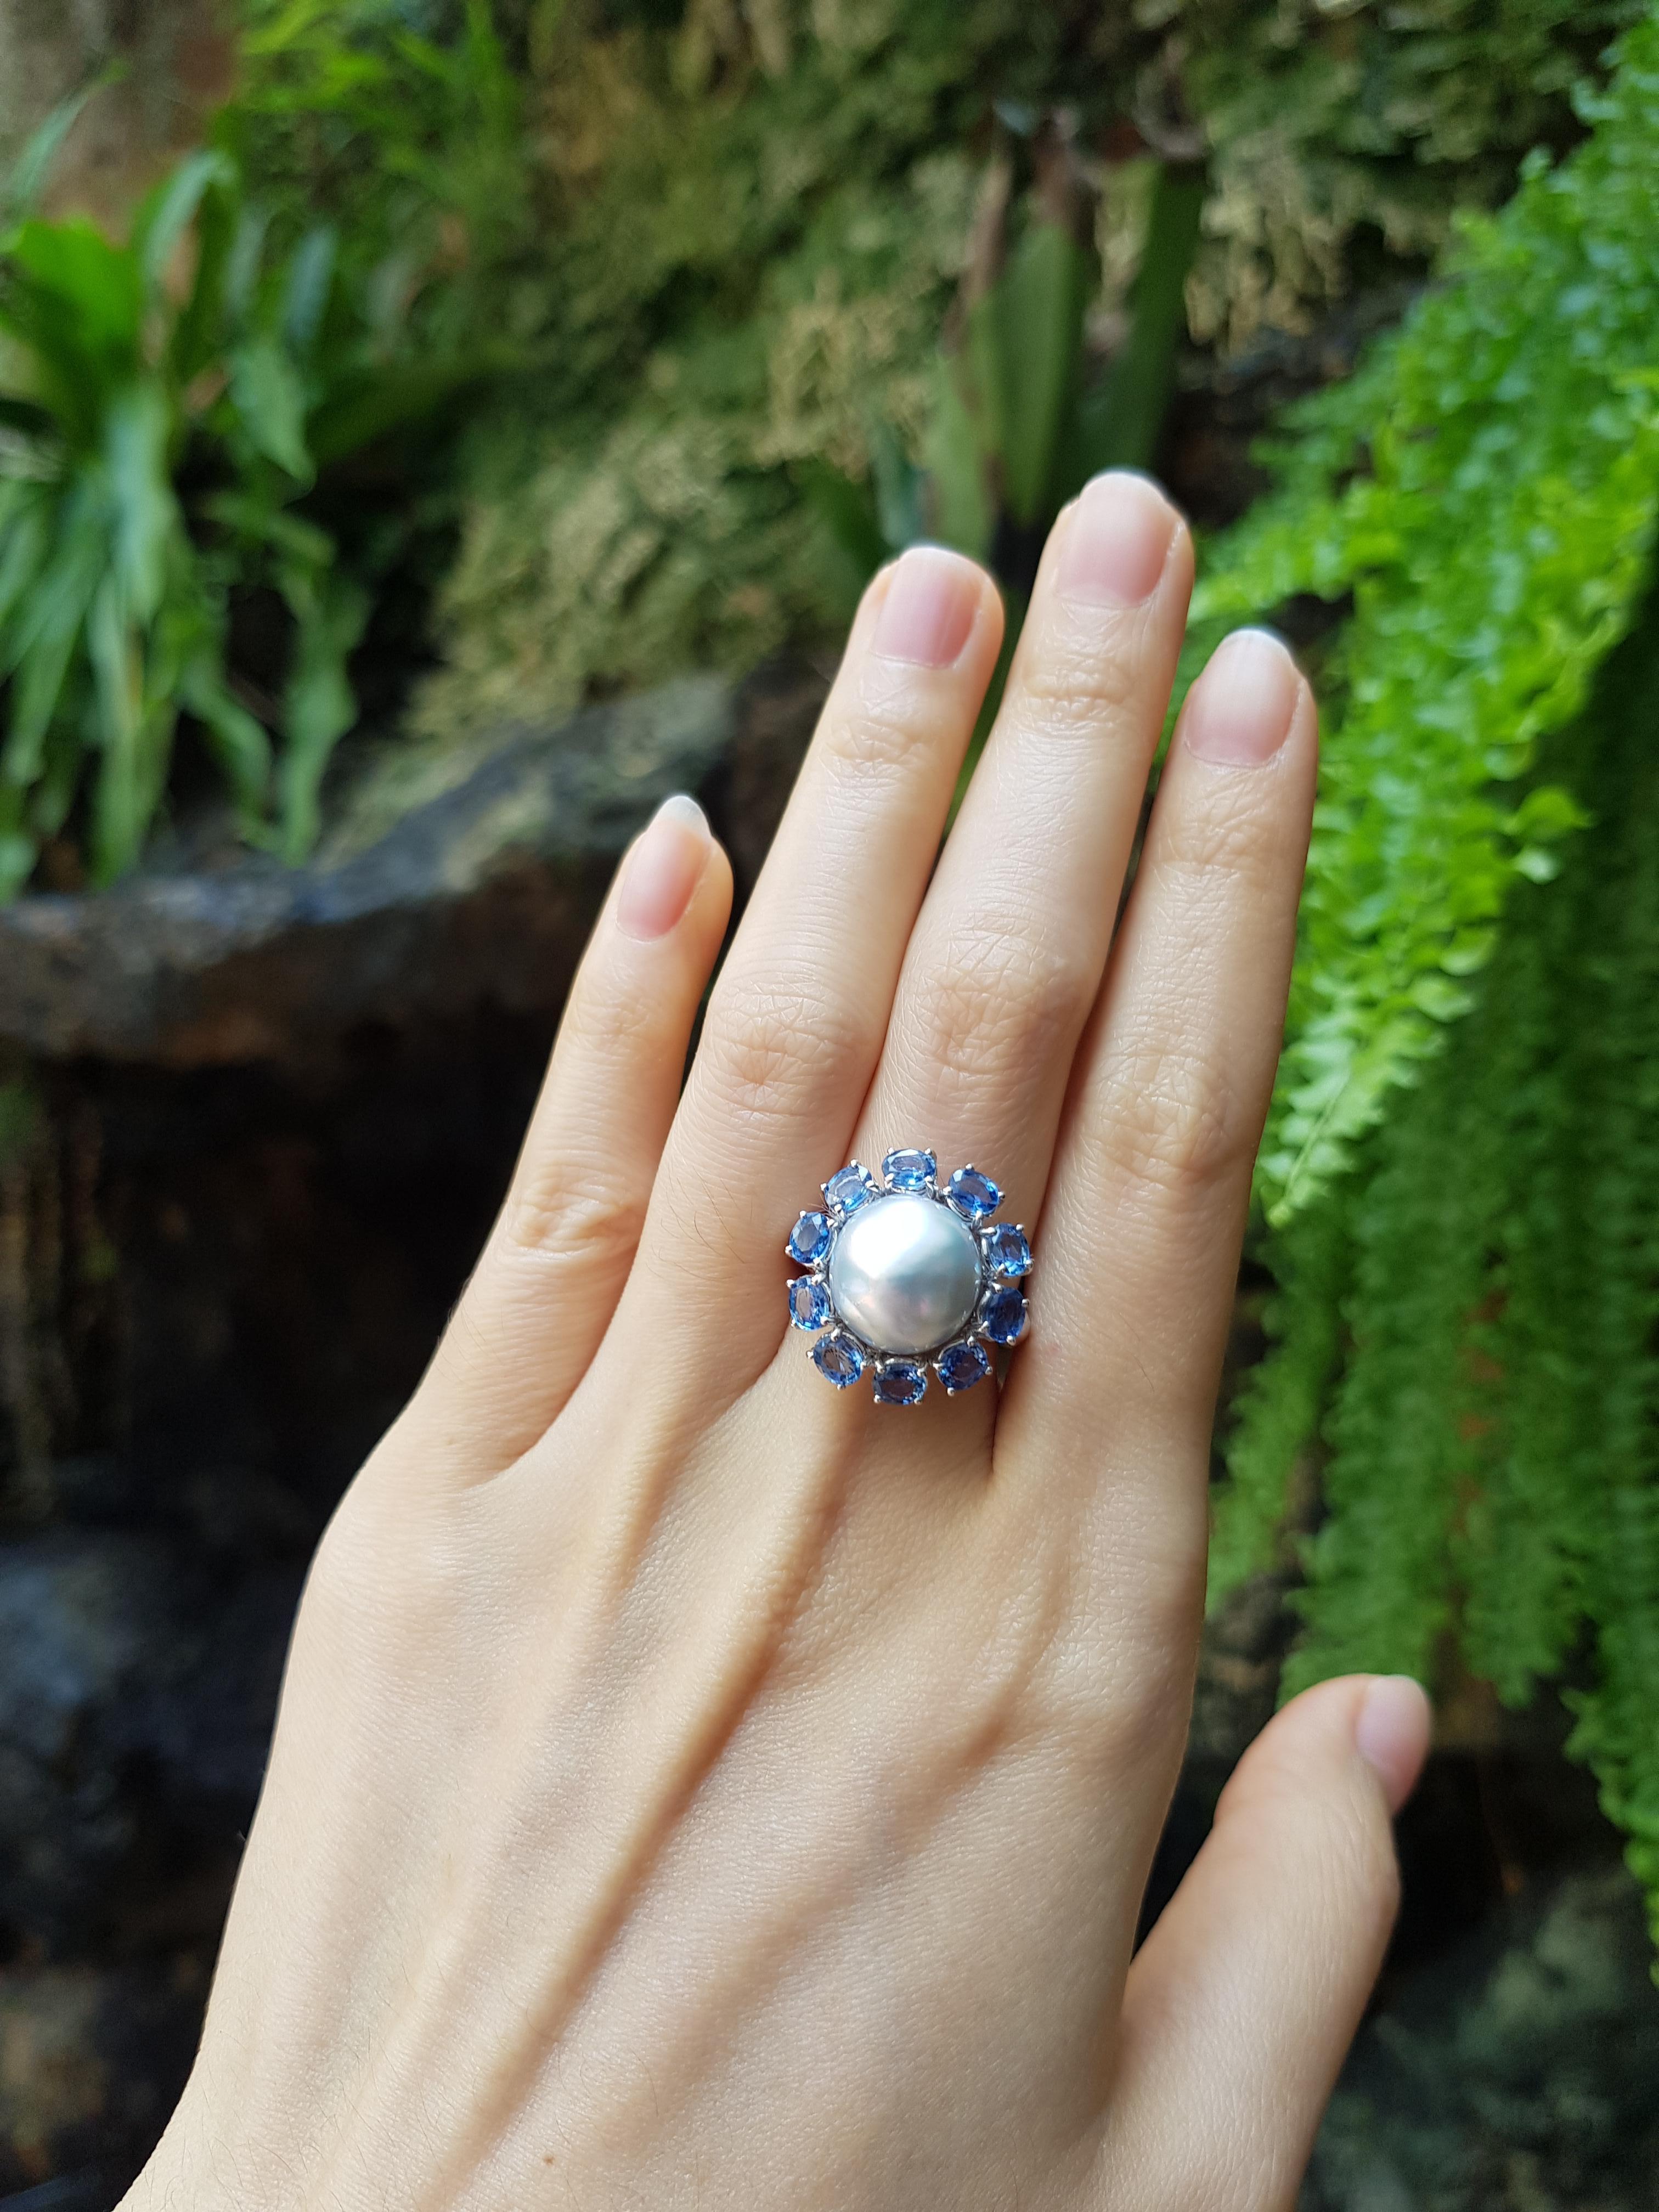 Pearl with Blue Sapphire 2.48 carats Ring set in 18 Karat White Gold Settings

Width: 1.8 cm
Length: 1.8 cm 
Ring Size: 52

